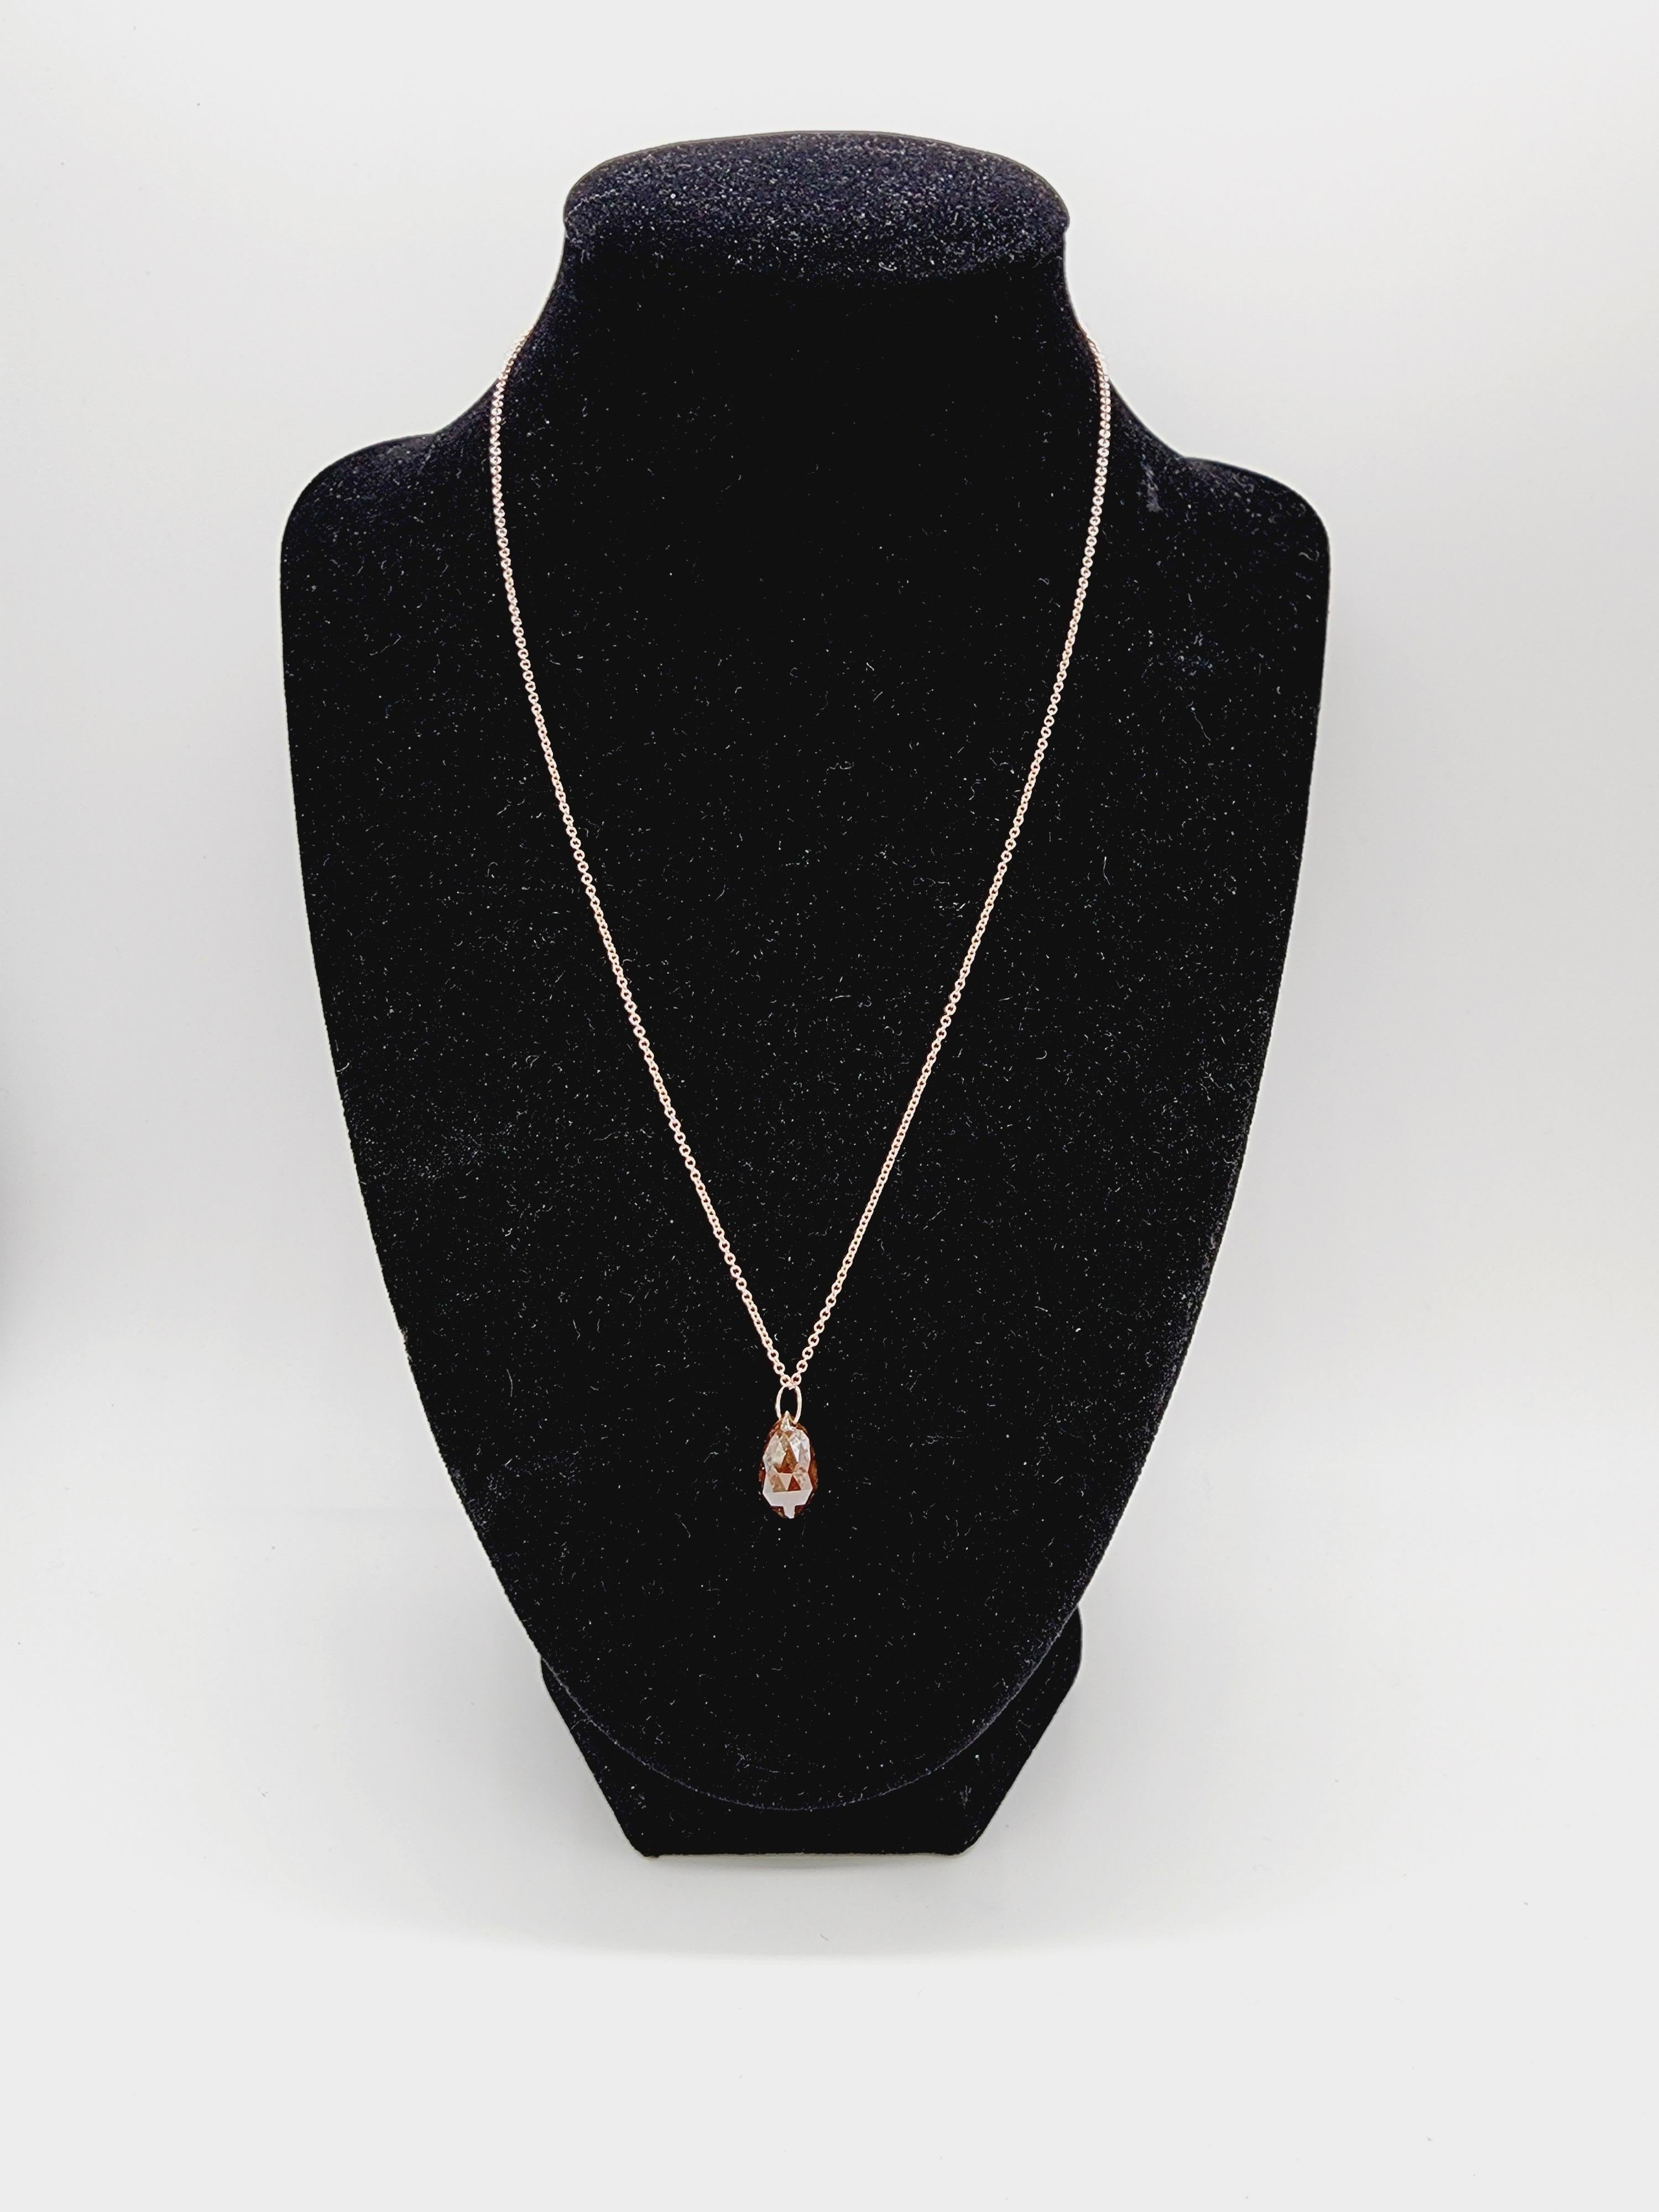 GIA 6.49 Carats Orangy Brown Diamond Briolette Pendant Rose Gold 14 Karat  Featuring a cognac-colored briolette weighing 6.49 carats.
Set in 14k rose gold pendant. chain measures 18 inch. easily adjustable to 16 inch with the attached extra loop.